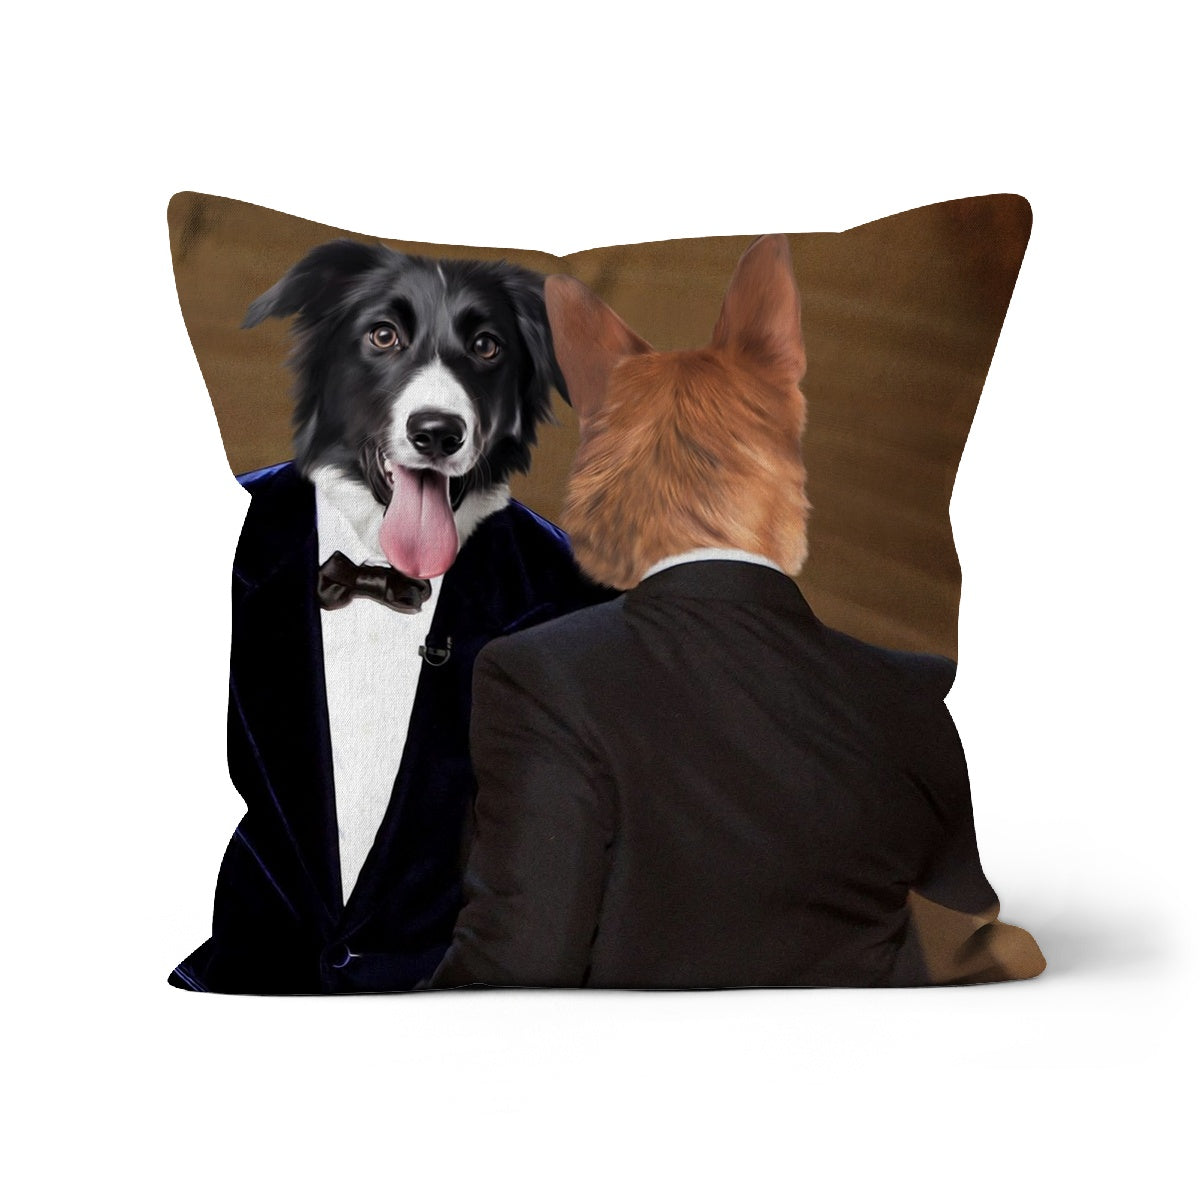 The Slap: Custom Pet Pillow, Paw & Glory, paw and glory,dog pillows personalized, pet face pillows, dog photo on pillow, custom cat pillows, pillow with pet picture